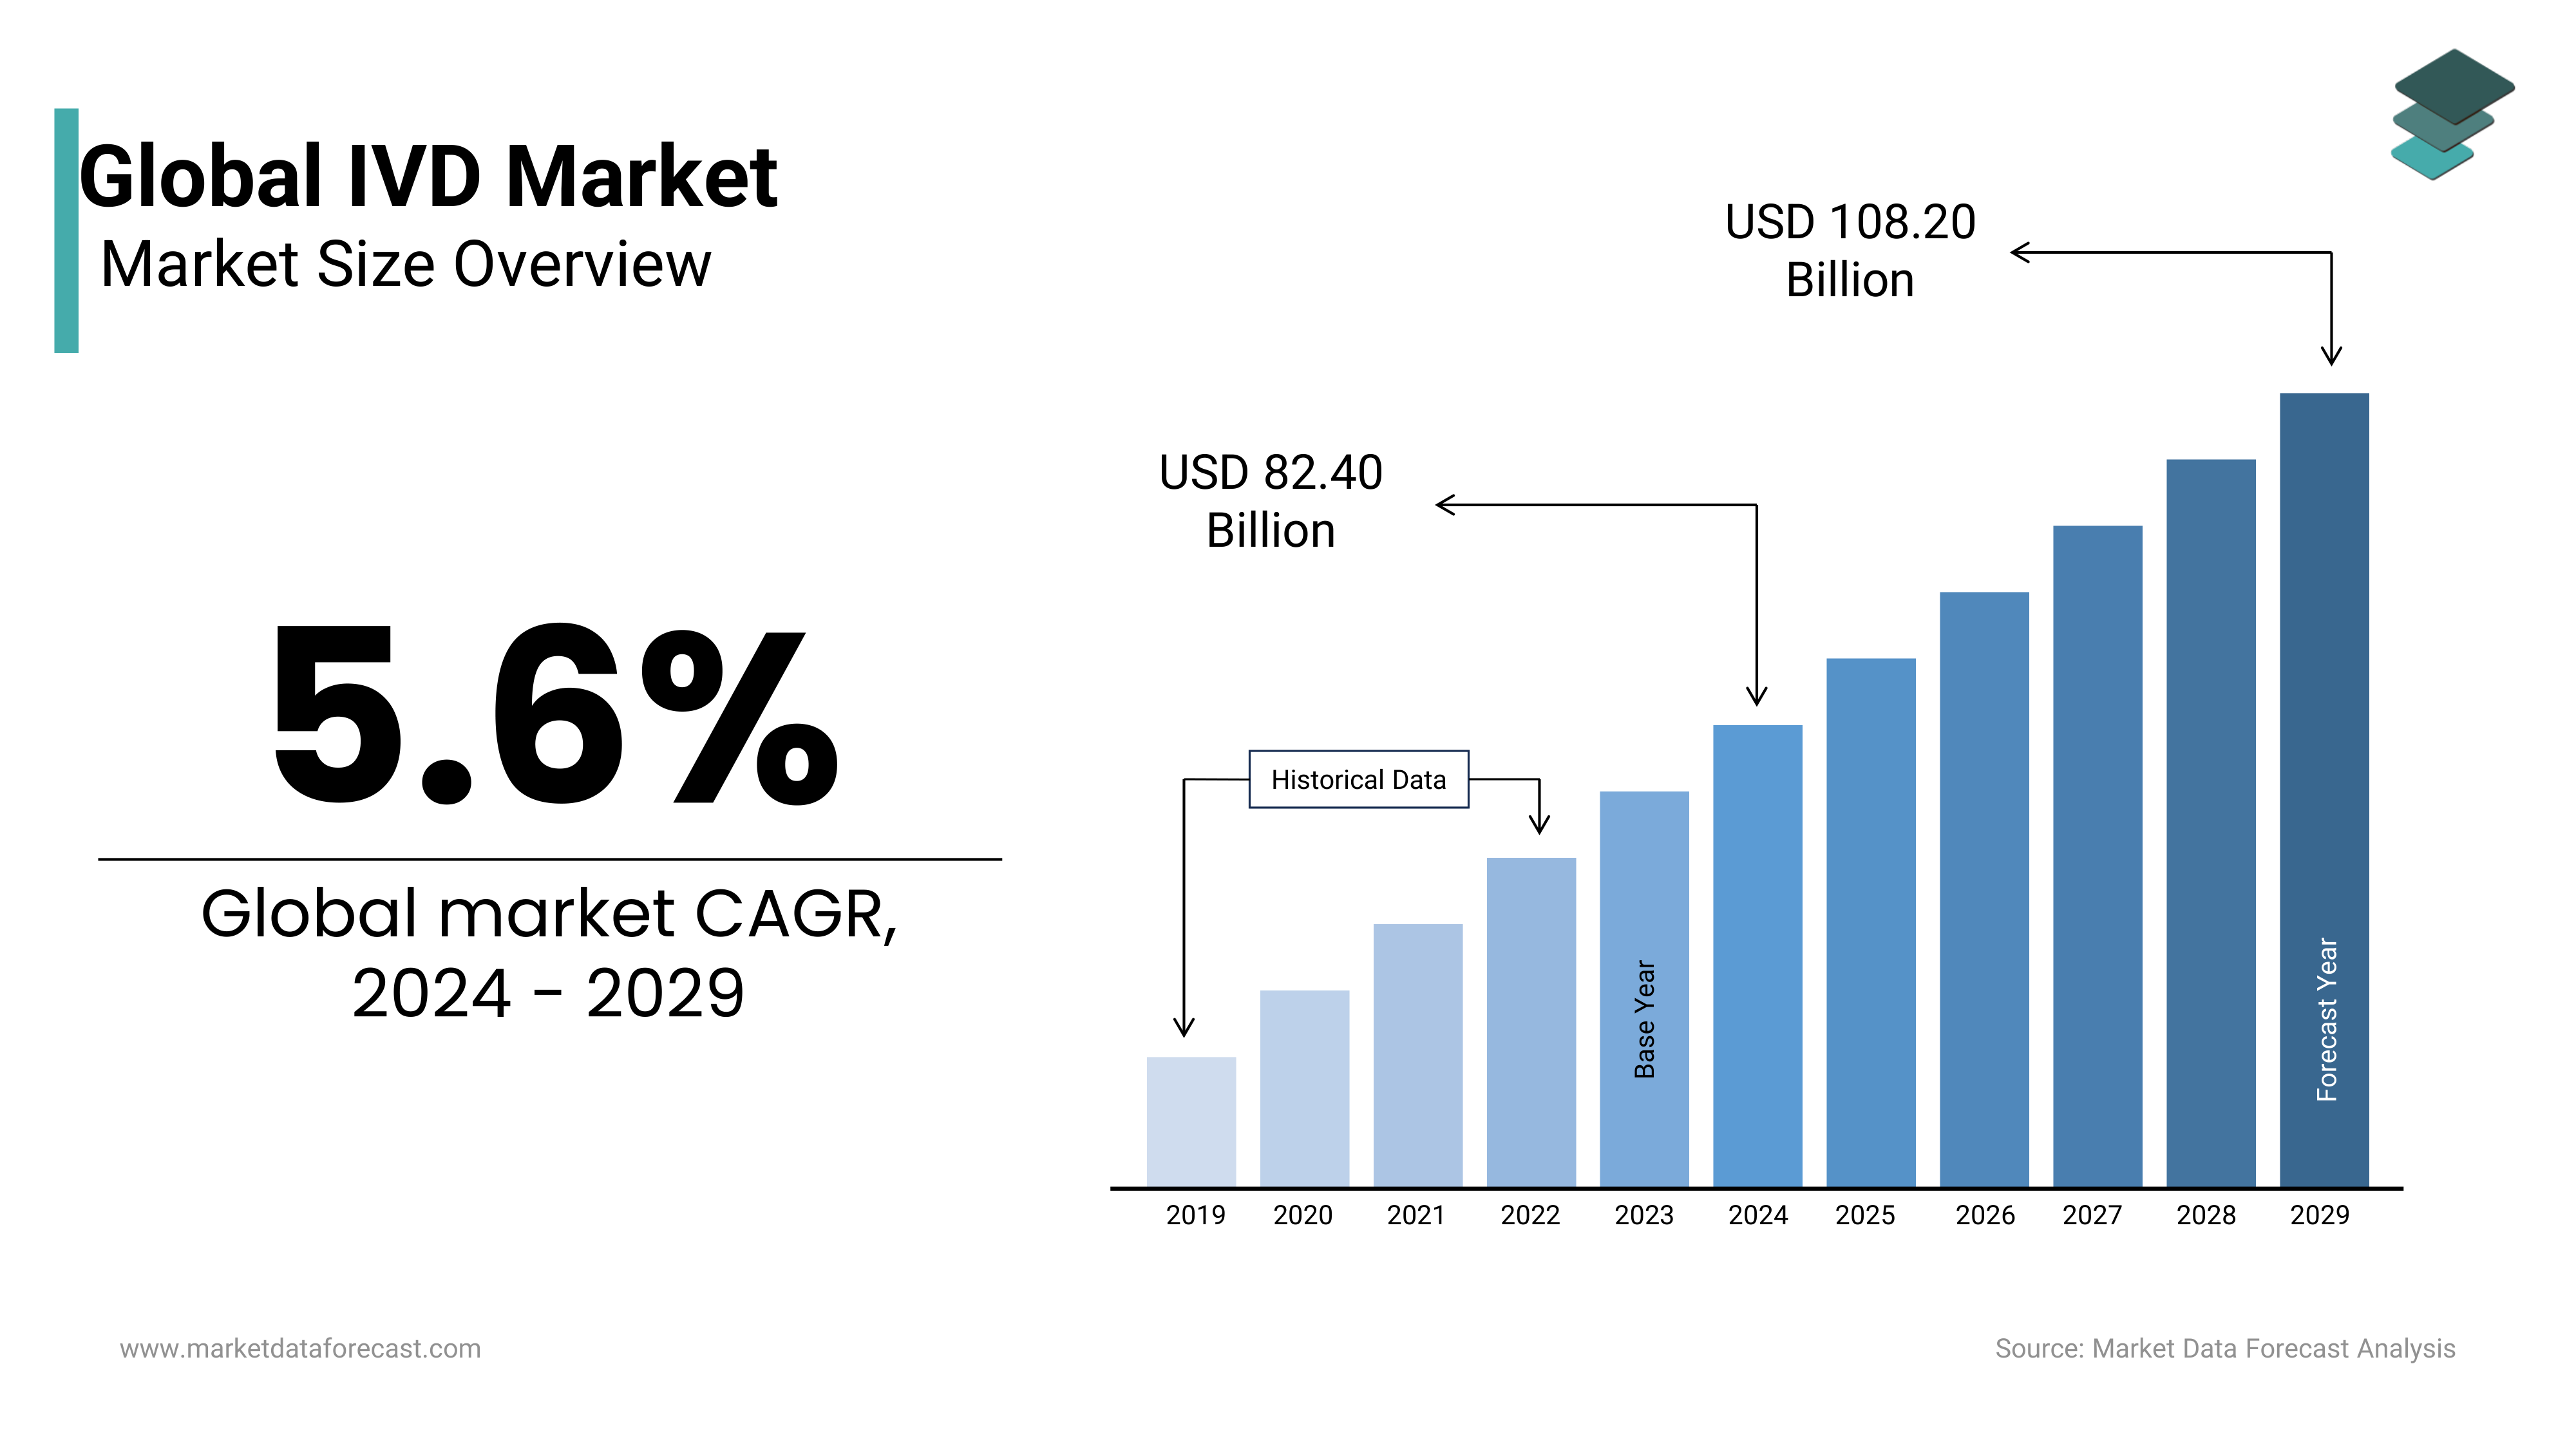 The global ivd market is predicted to grow at a CAGR of 5.6% from 2024 to 2029